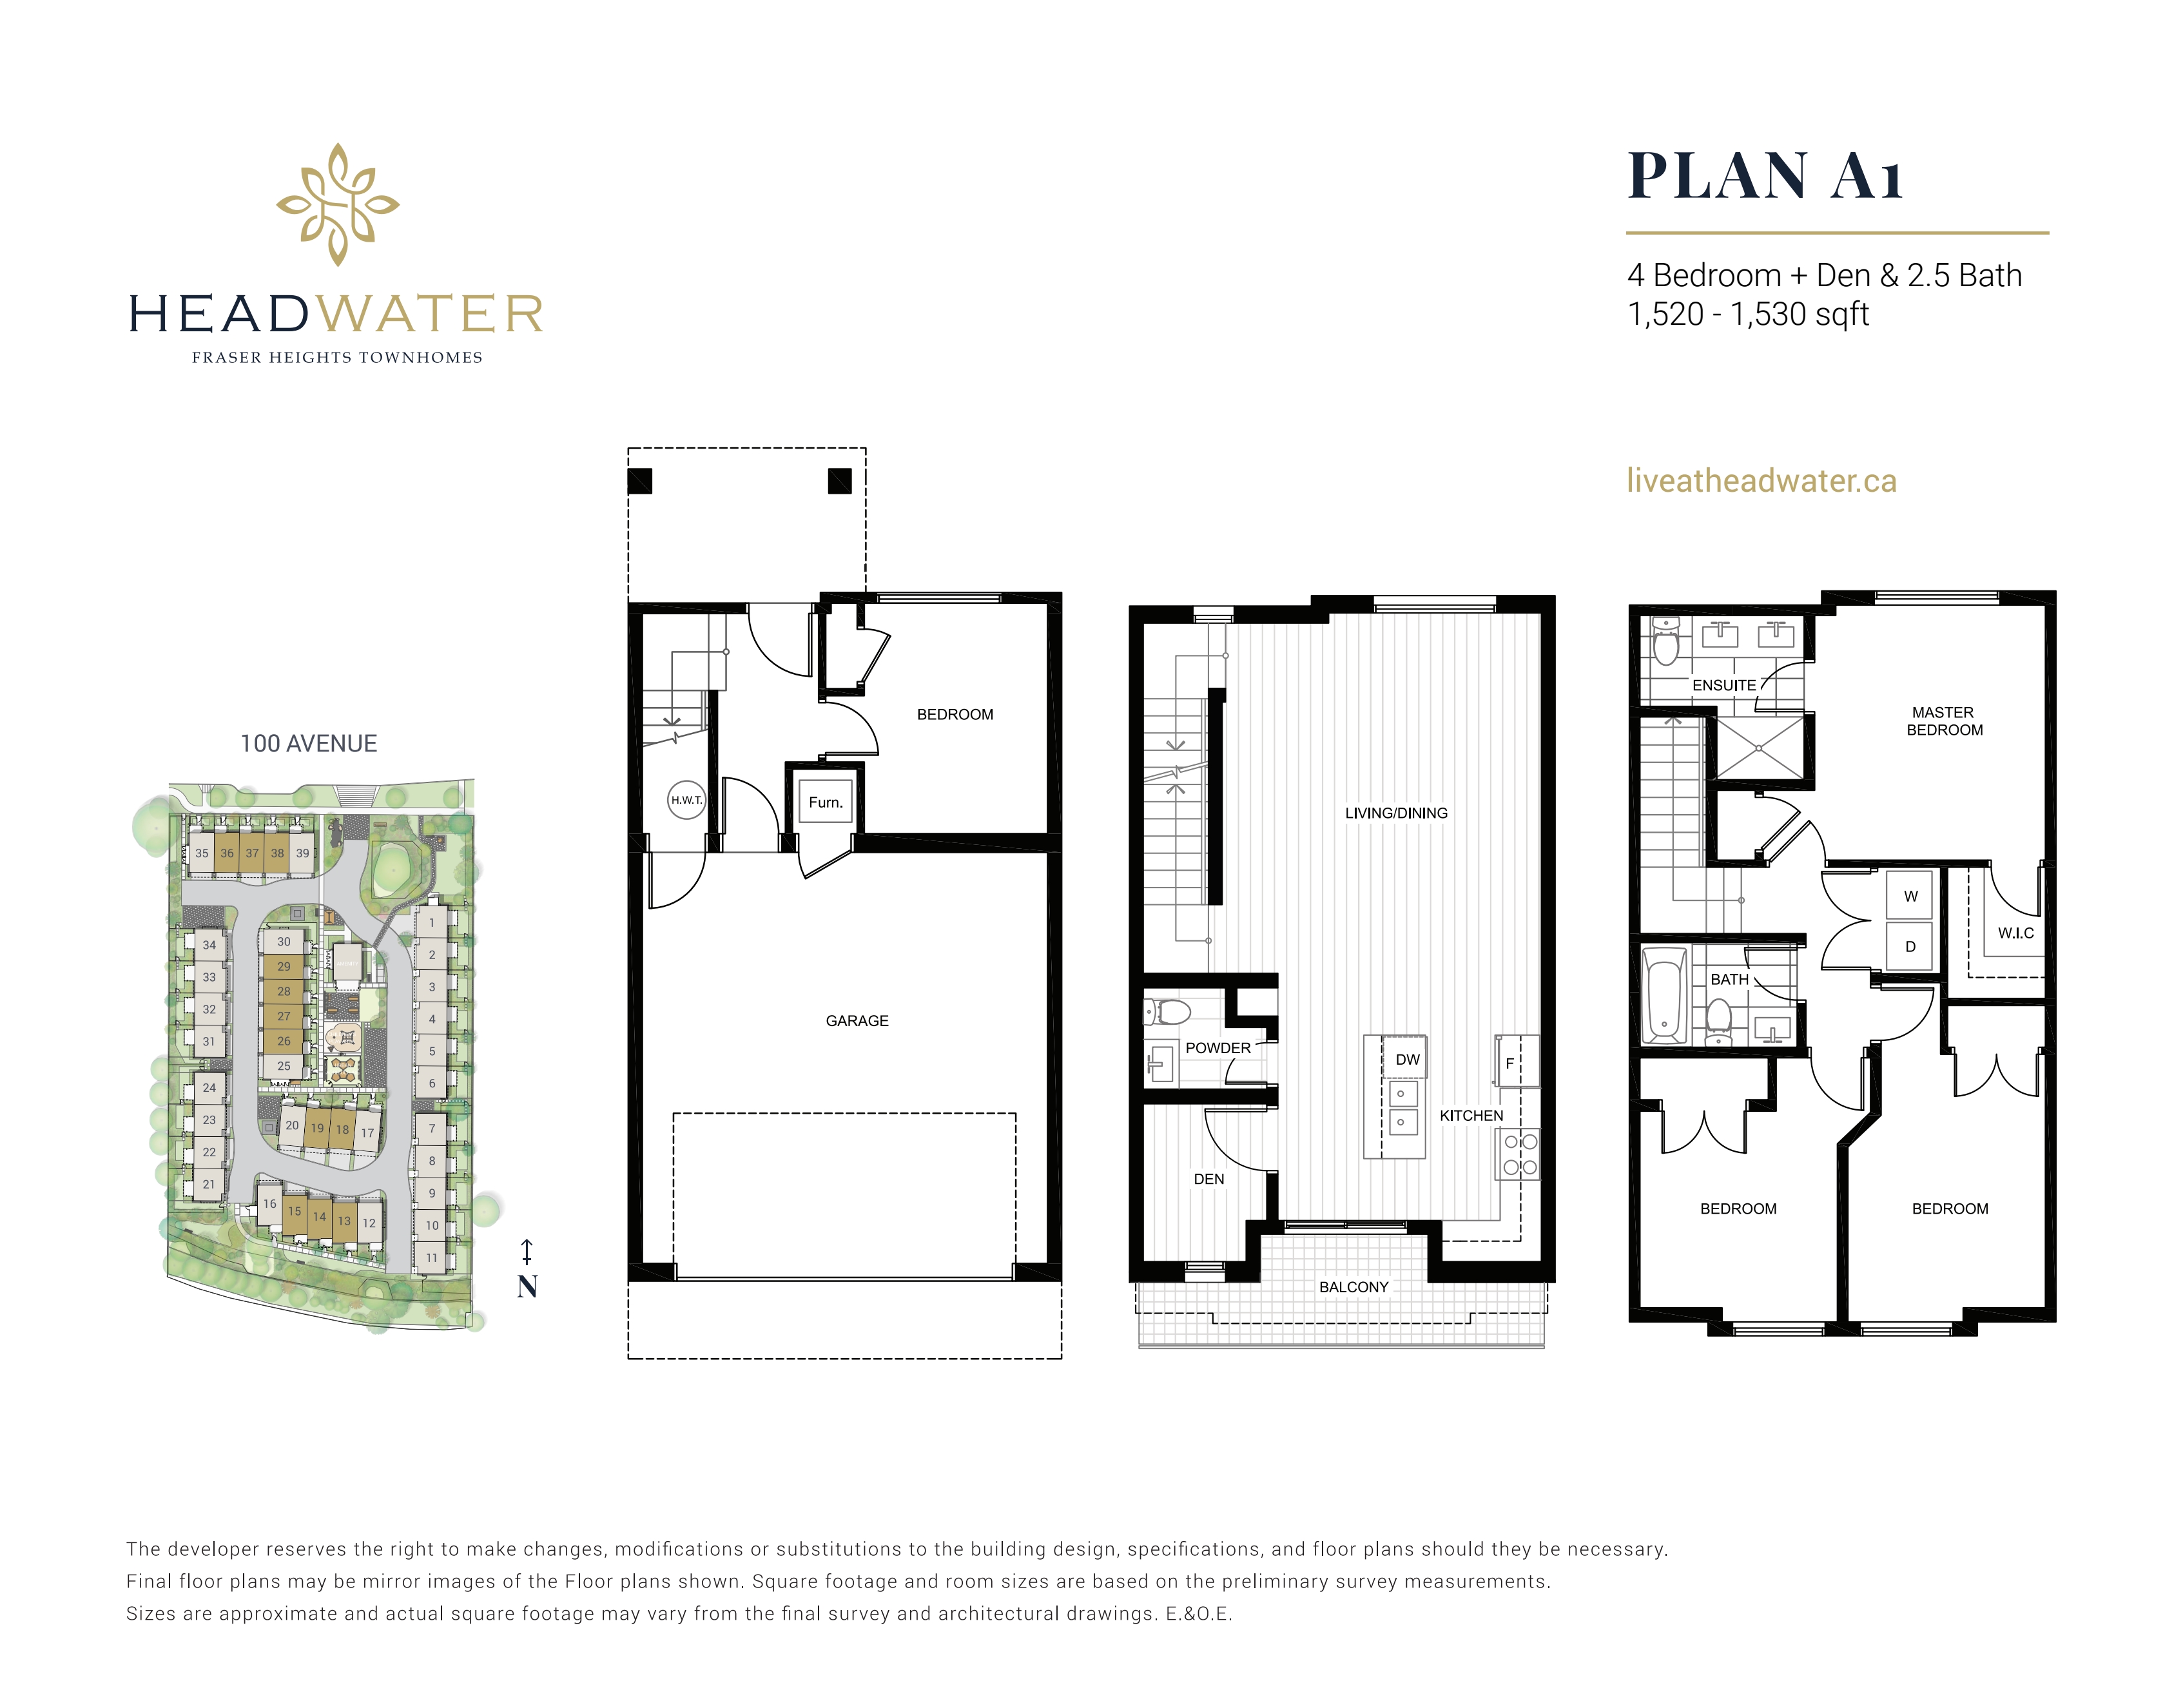 A1 Floor Plan of Headwater Towns with undefined beds